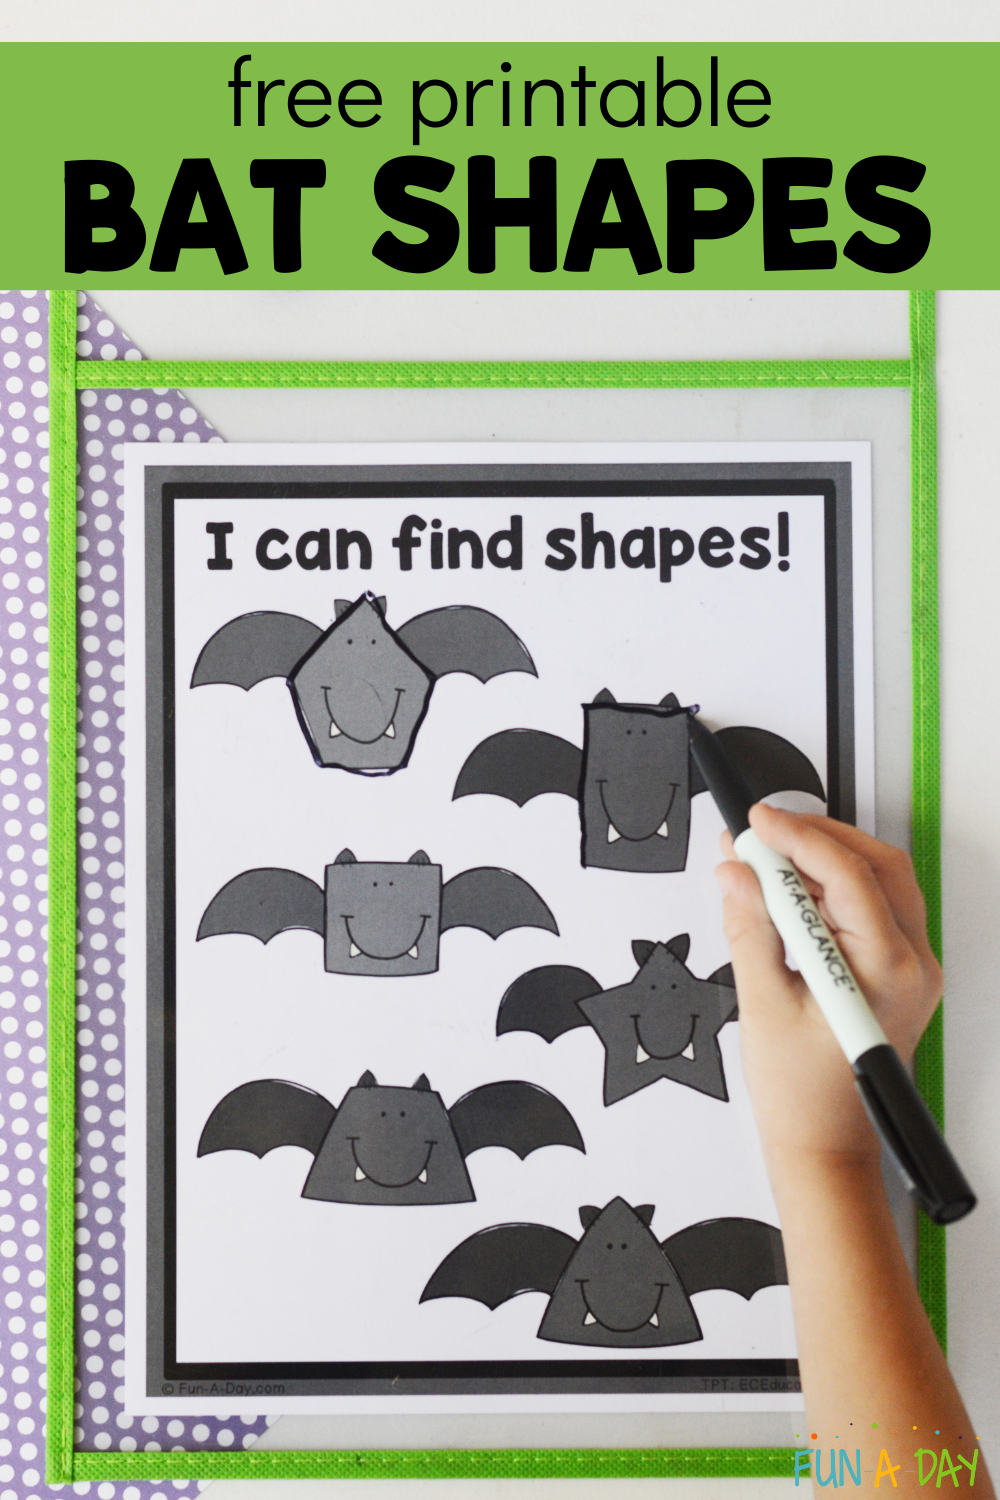 Child tracing shapes with text that reads free printable bat shapes